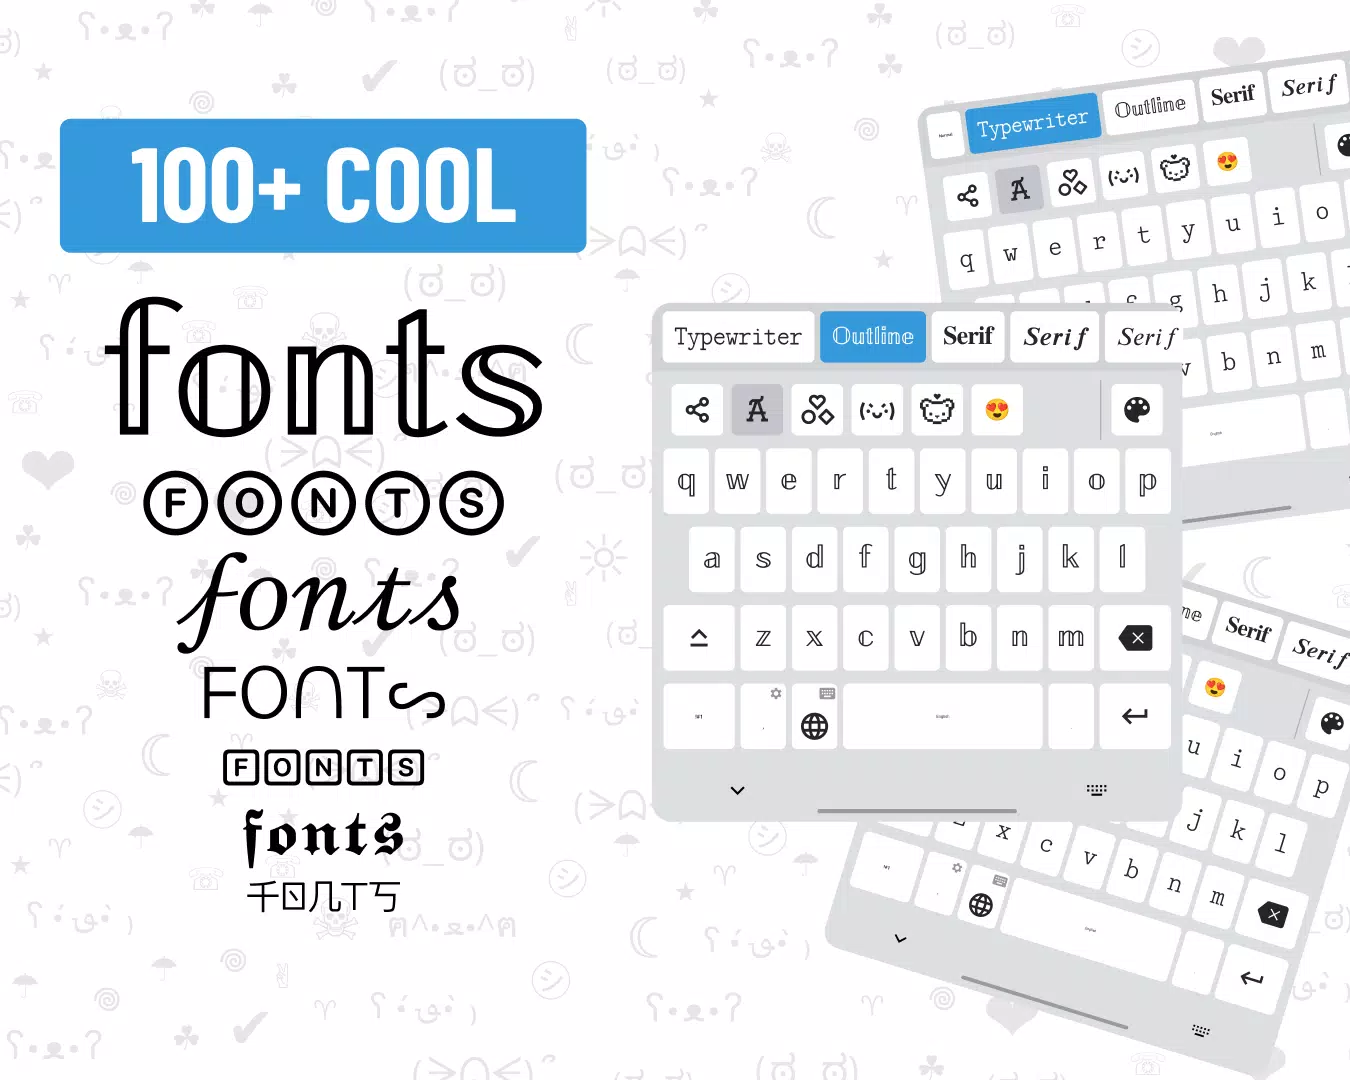 Fonts for Android - Download the APK from Uptodown